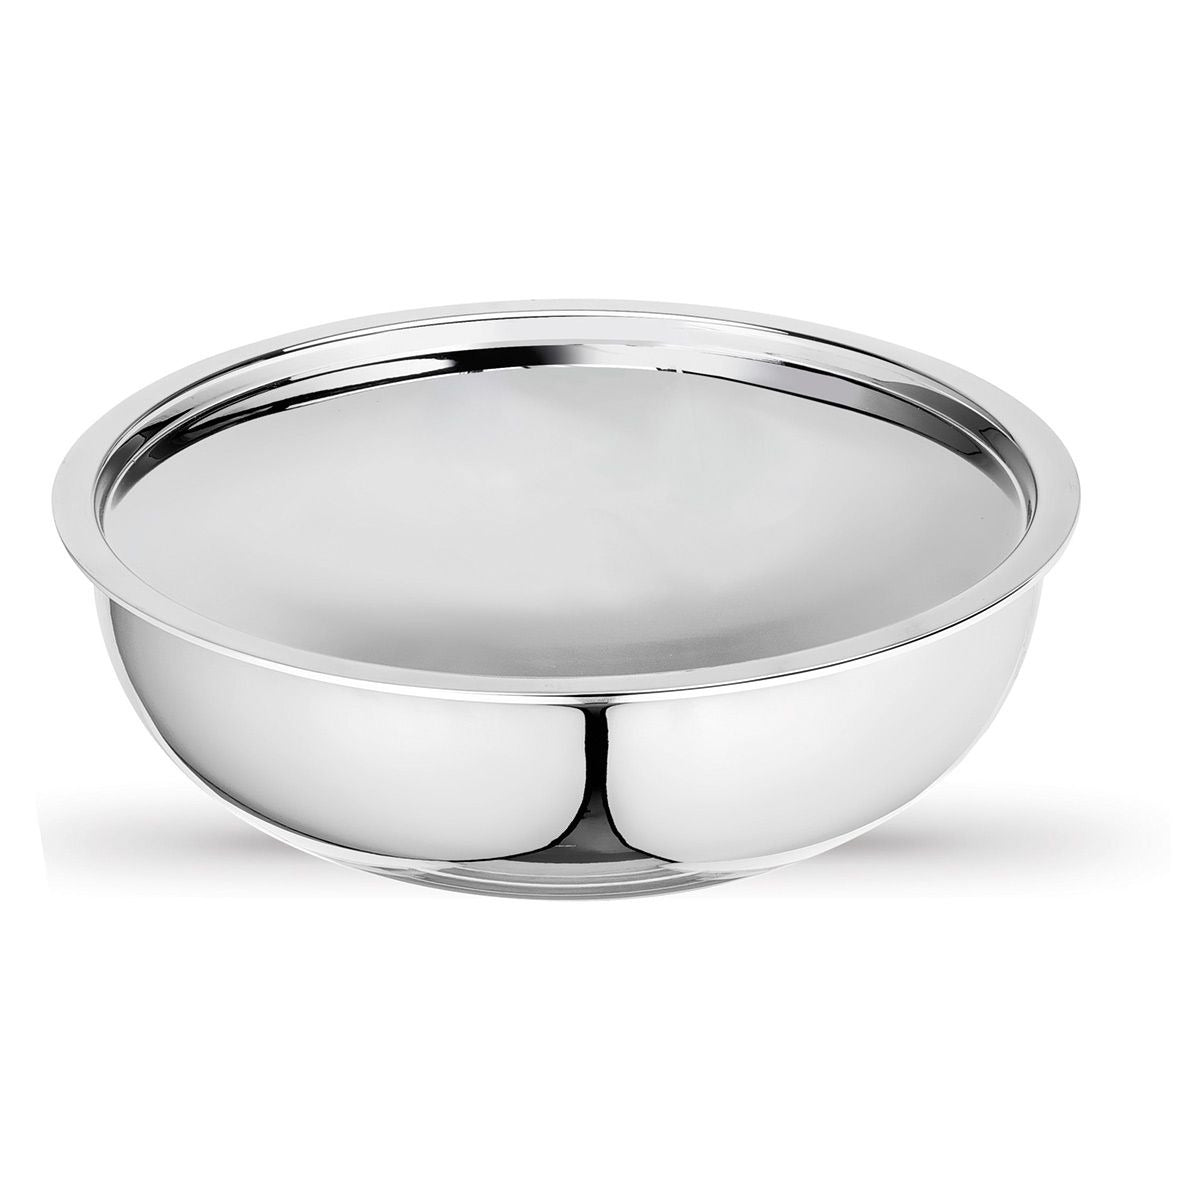 Artista Triply Stainless Steel Shallow Tasla With Lid| Silver